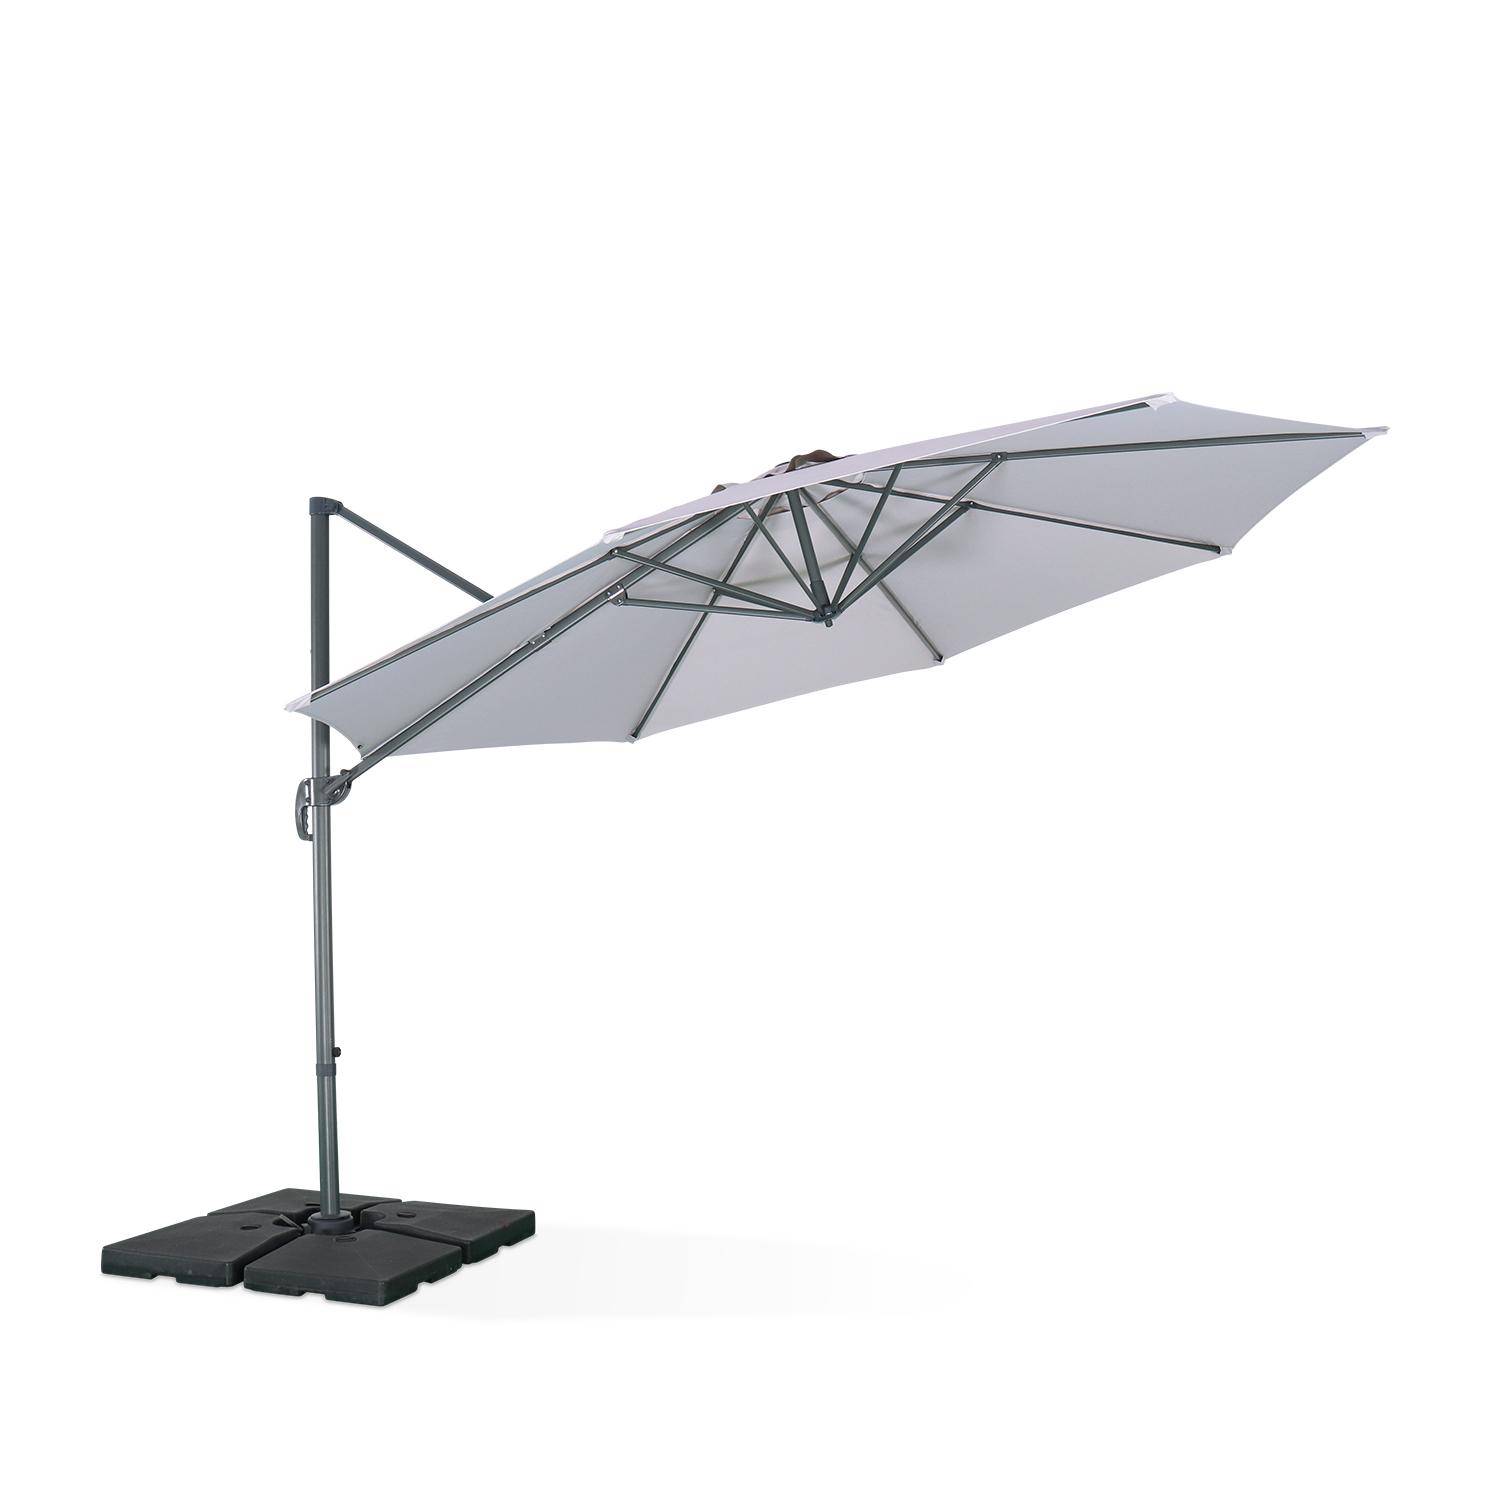 Parasol Ø350cm - parasol that can be tilted, folded and 360° rotation - Antibes - Light grey Photo3